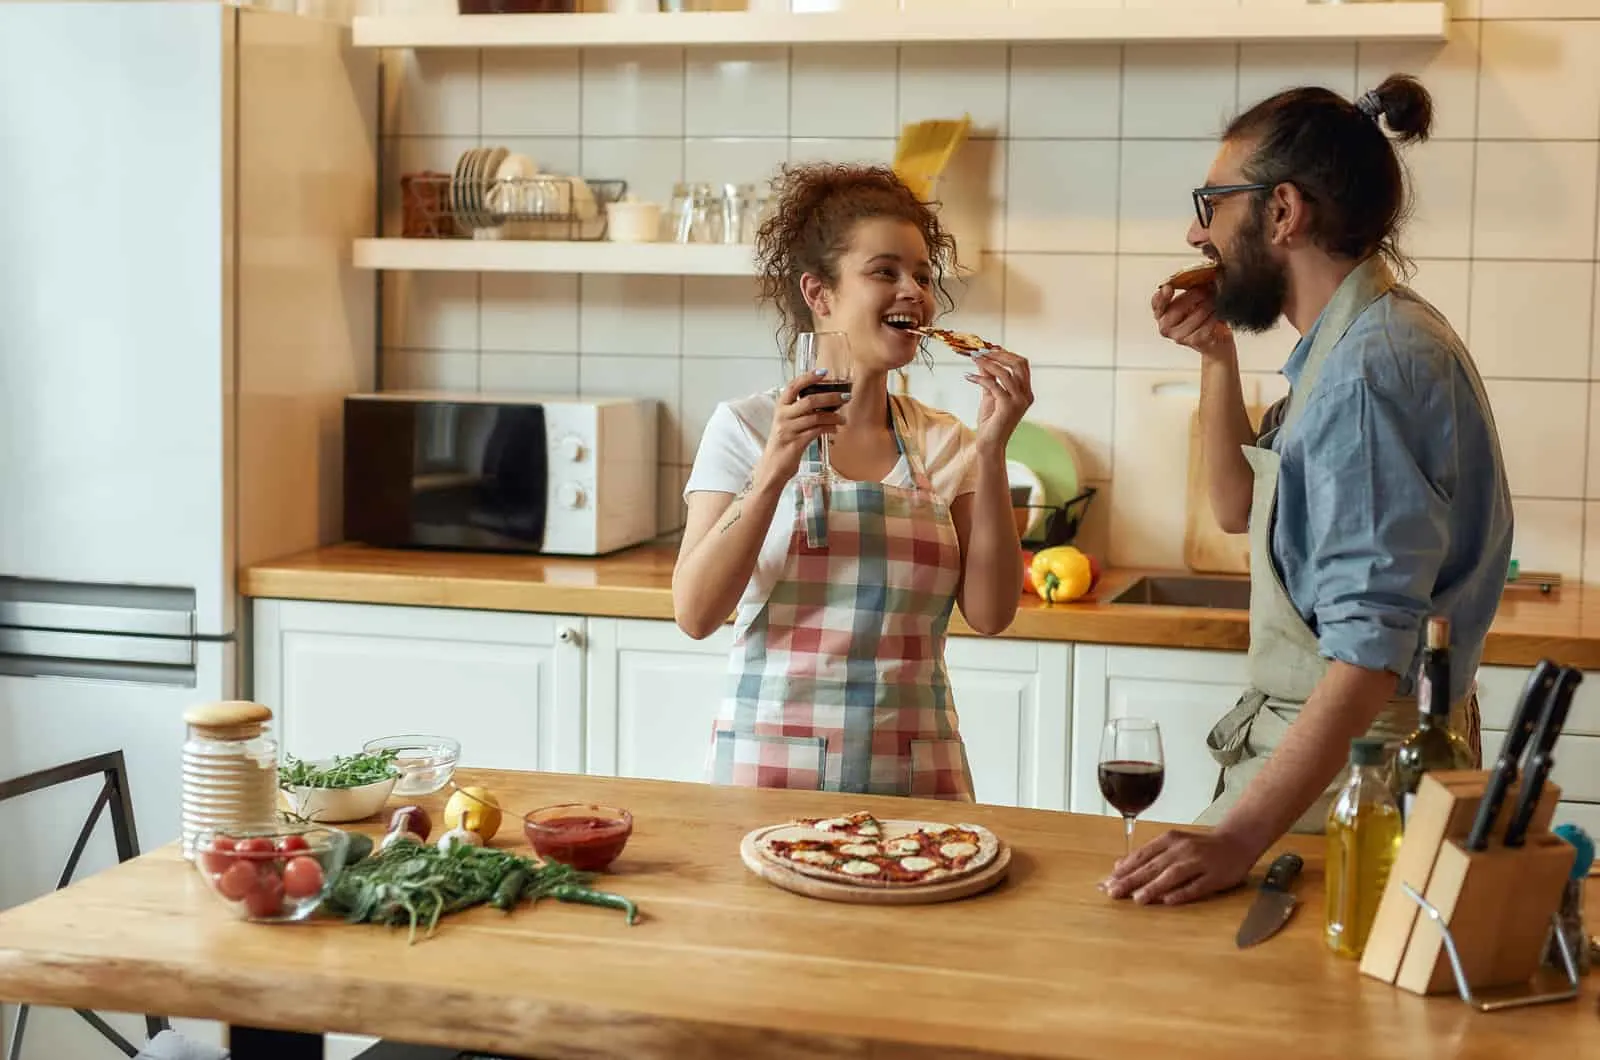 happy couple in kitchen talking and eating pizza